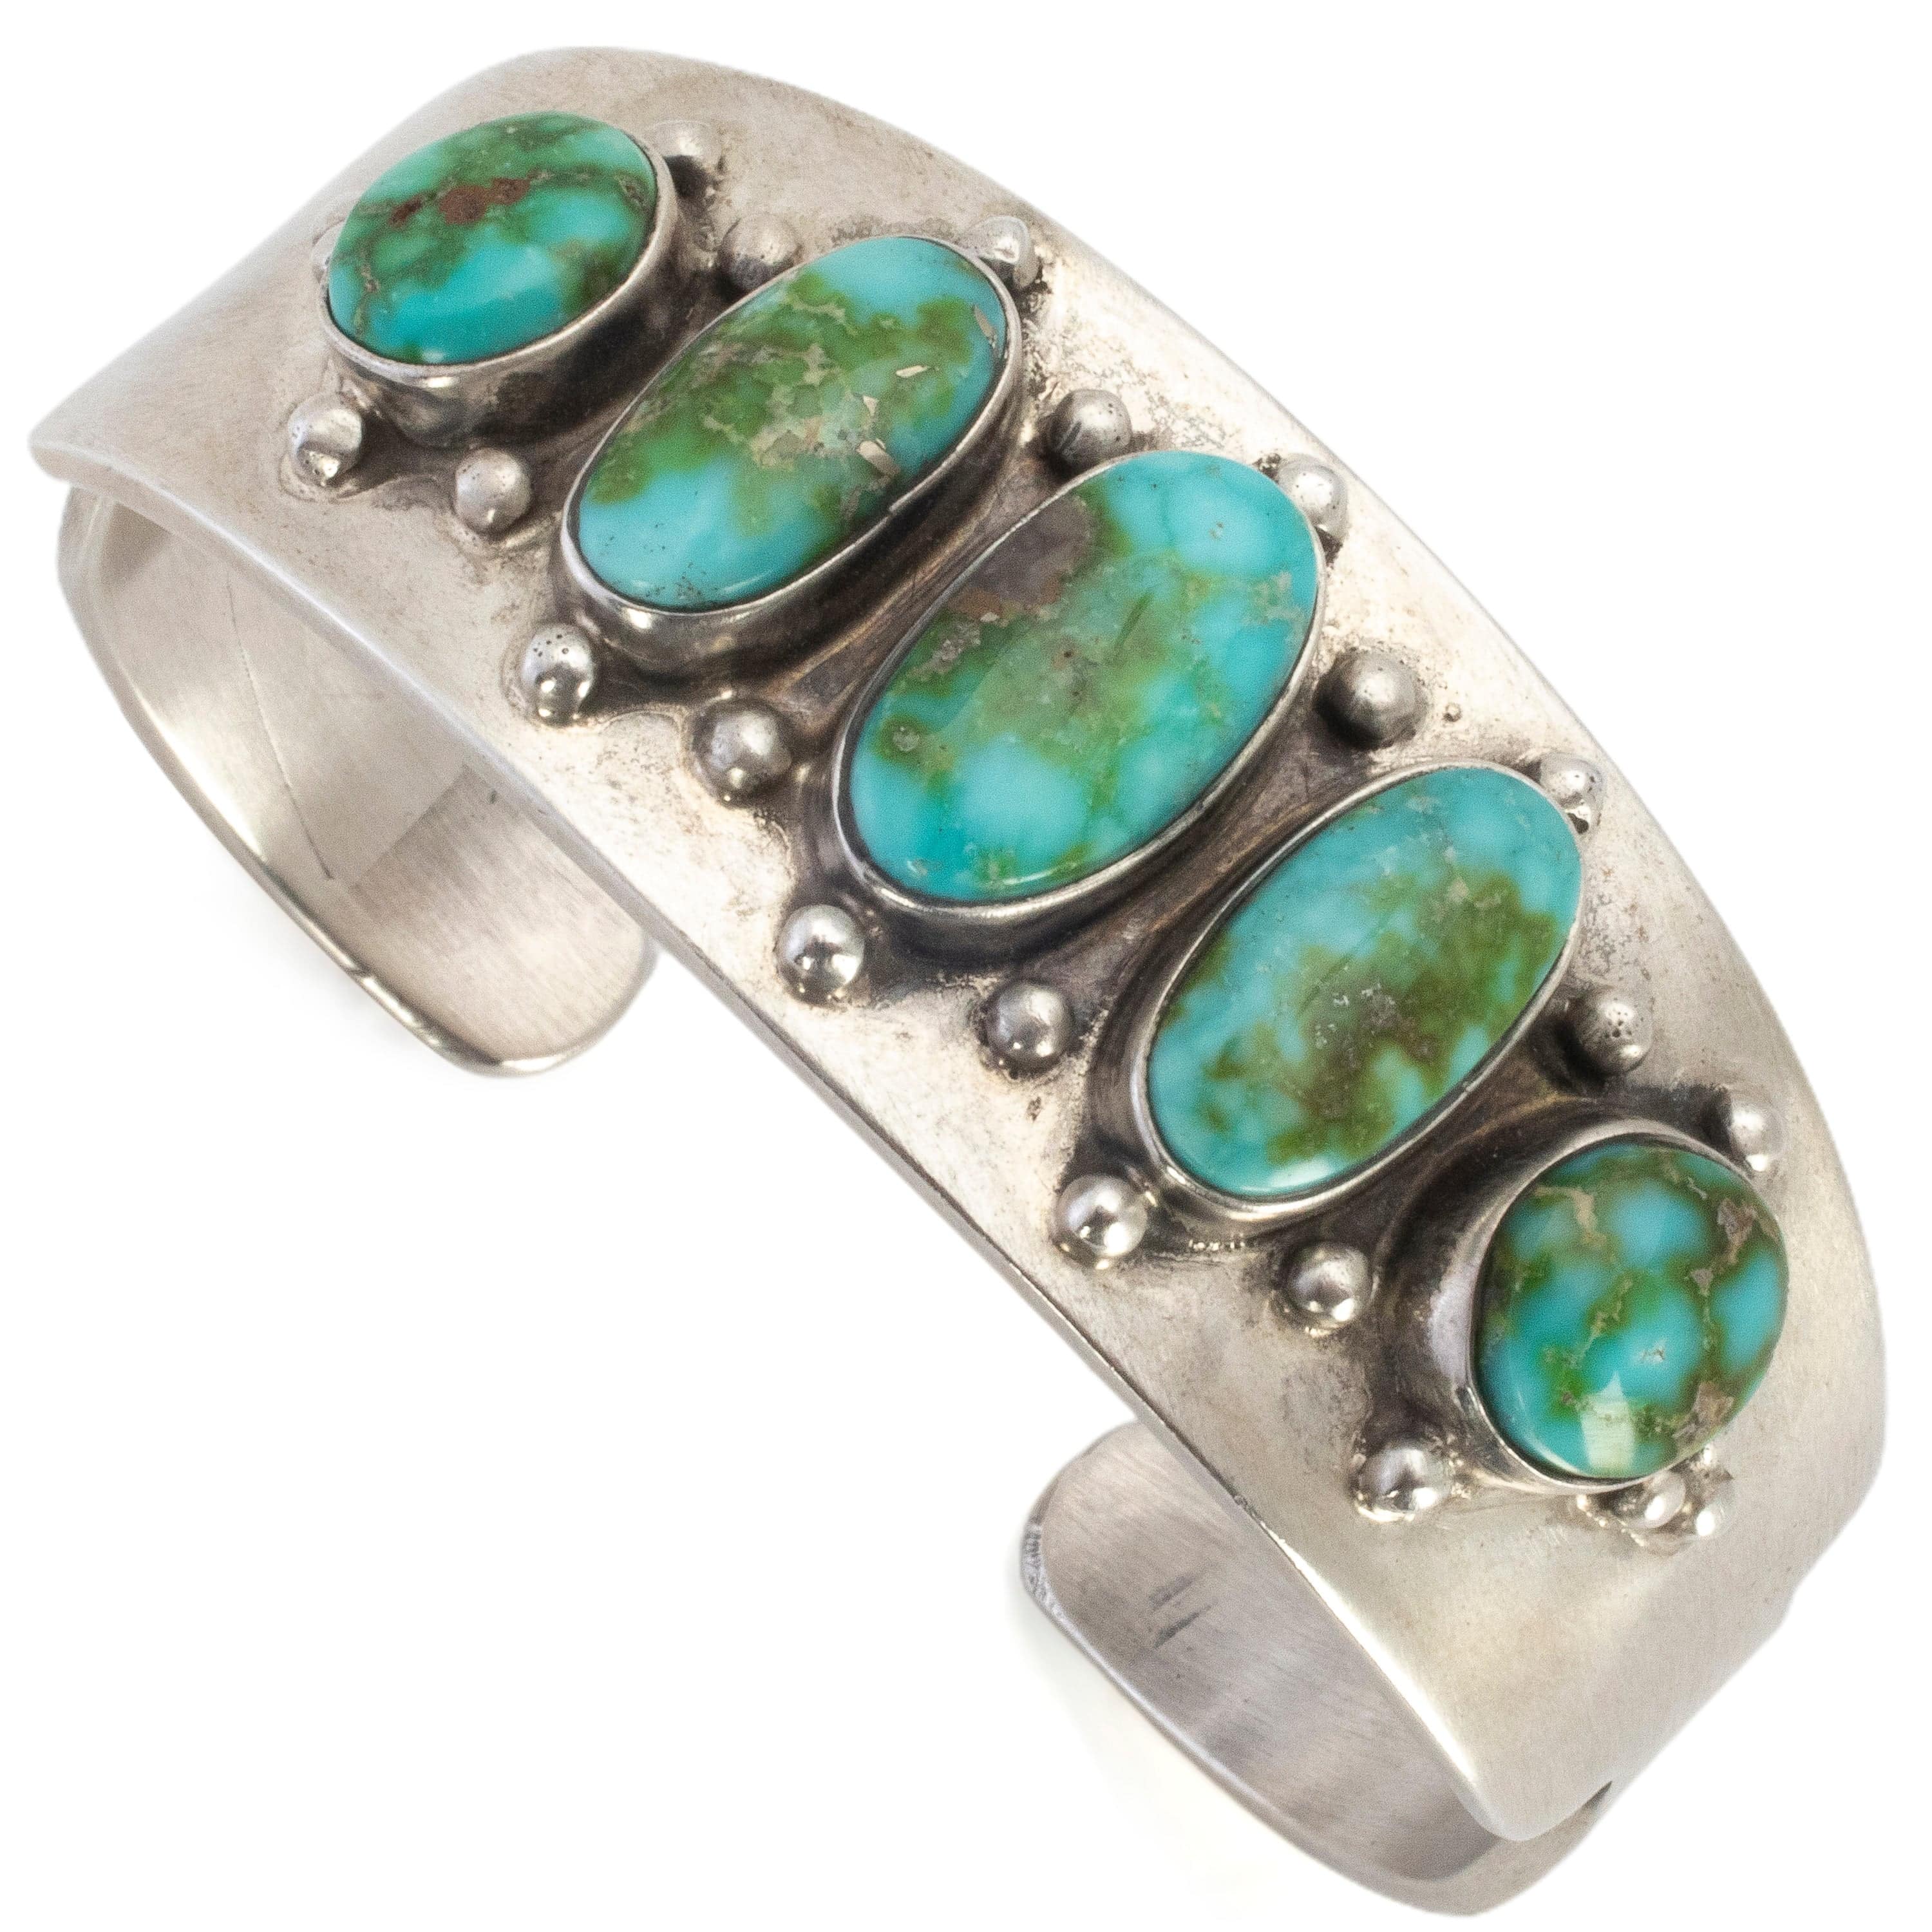 kalifano native american jewelry bobby becenti navajo sonoran gold turquoise usa native american made 925 sterling silver cuff nab3000 011 36279593009346